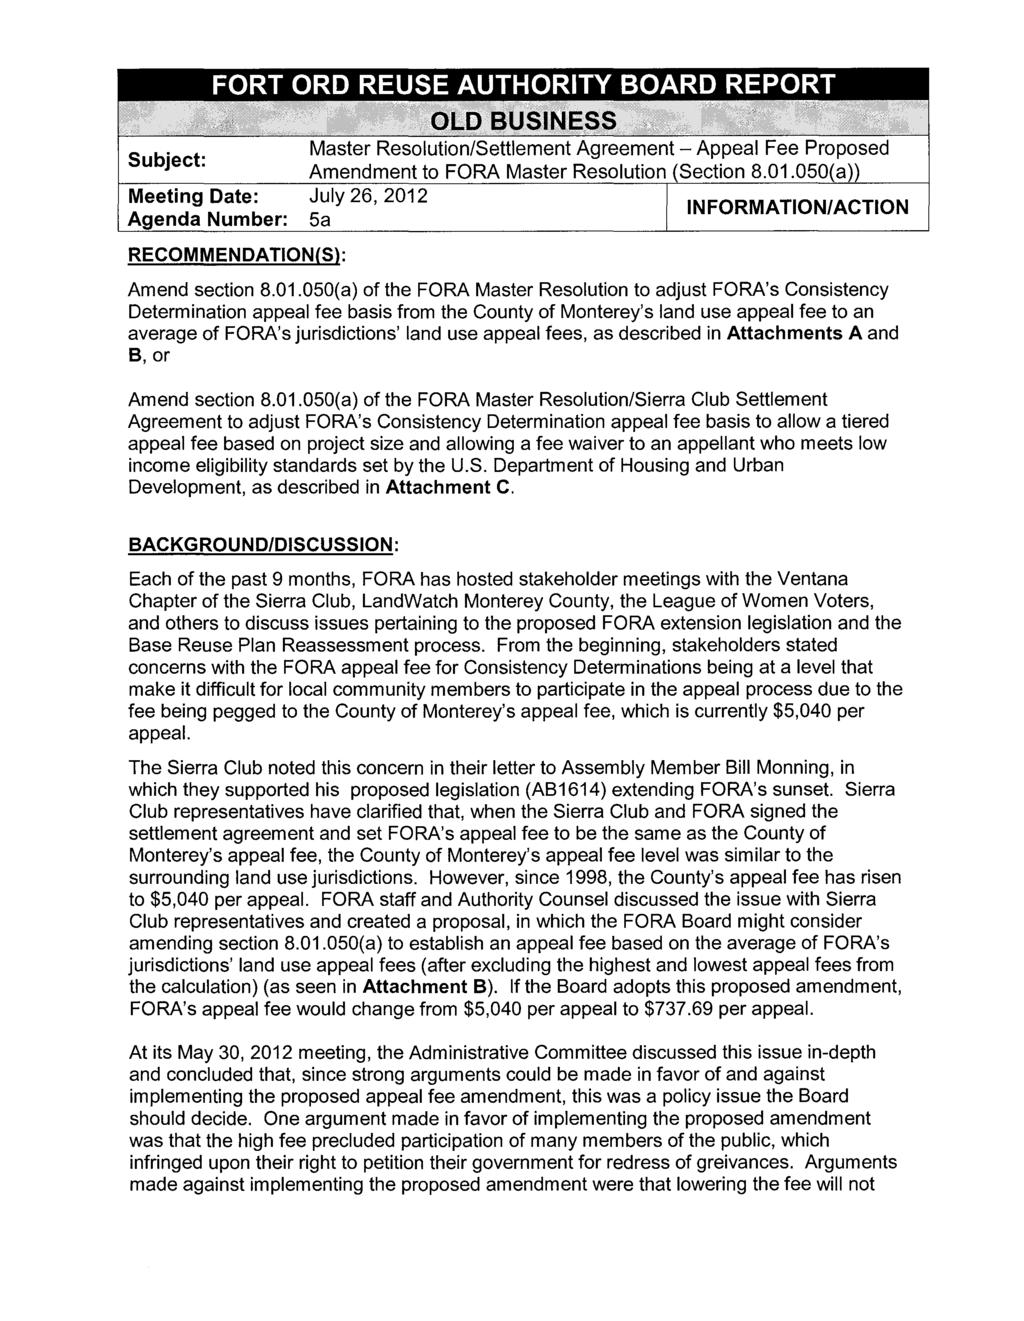 Subject: FORT ORD REUSE AUTHORITY BOARD REPORT OLD BUSINE~S.\.... Master Resolution/Settlement Agreement - Appeal Fee Proposed Amendment to FORA Master Resolution (Section 8.1.